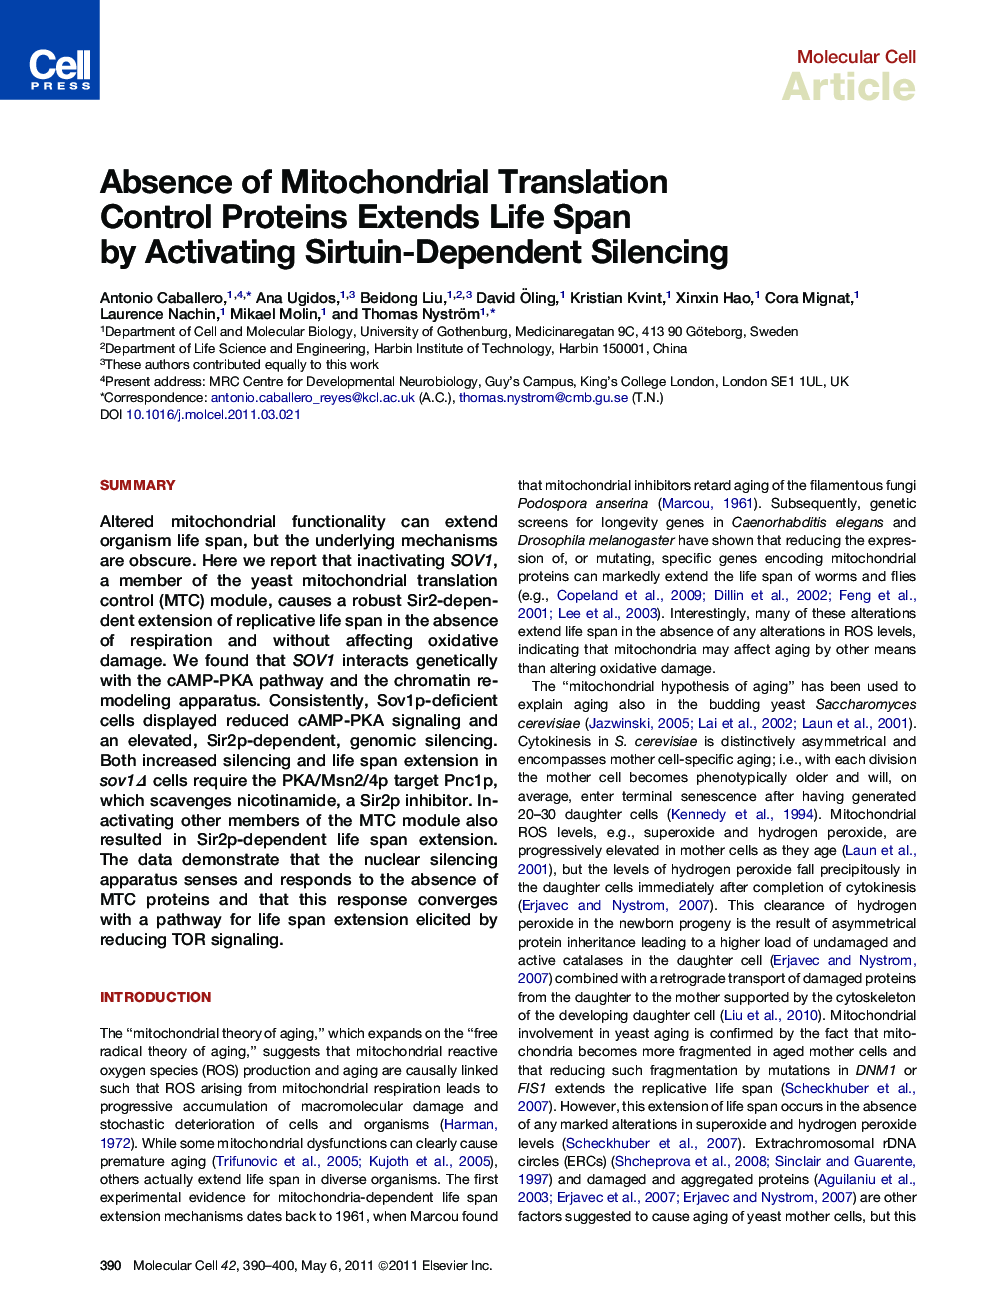 Absence of Mitochondrial Translation Control Proteins Extends Life Span by Activating Sirtuin-Dependent Silencing